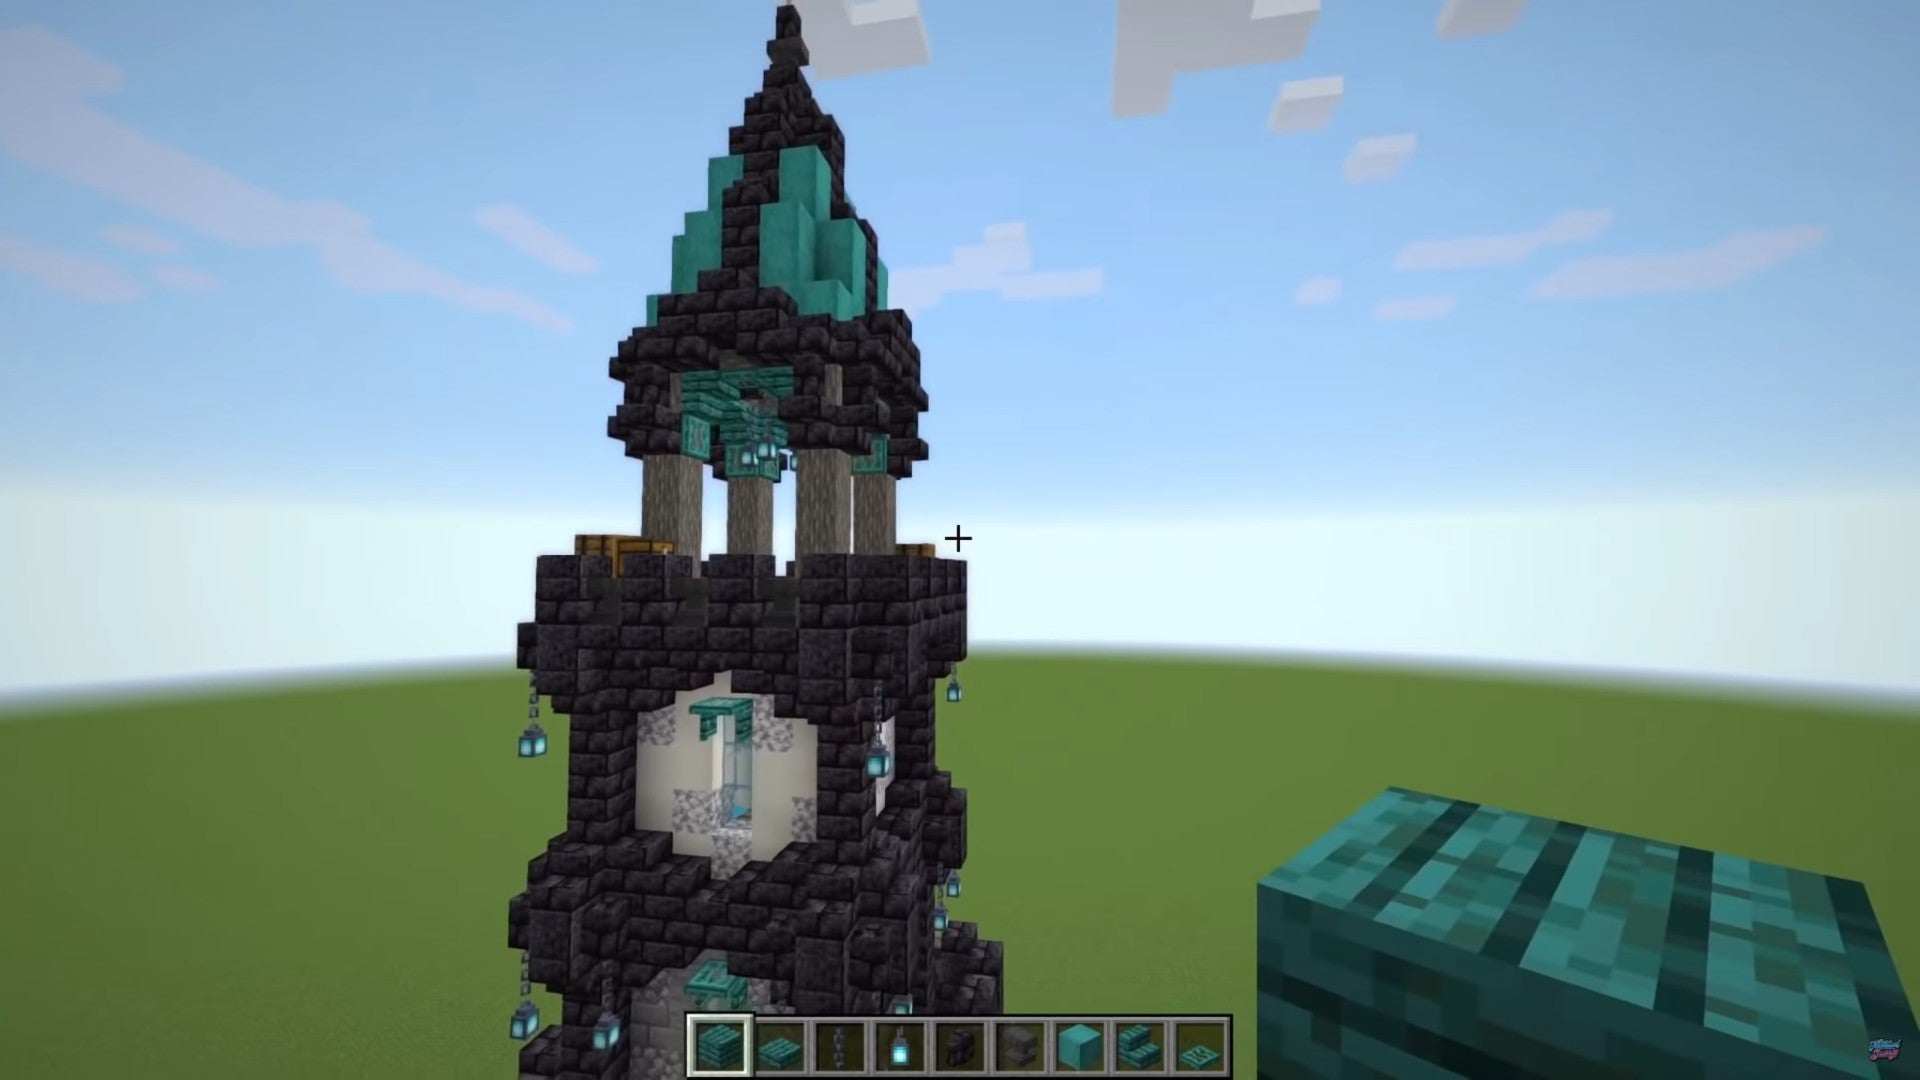 A medieval tower built in Minecraft